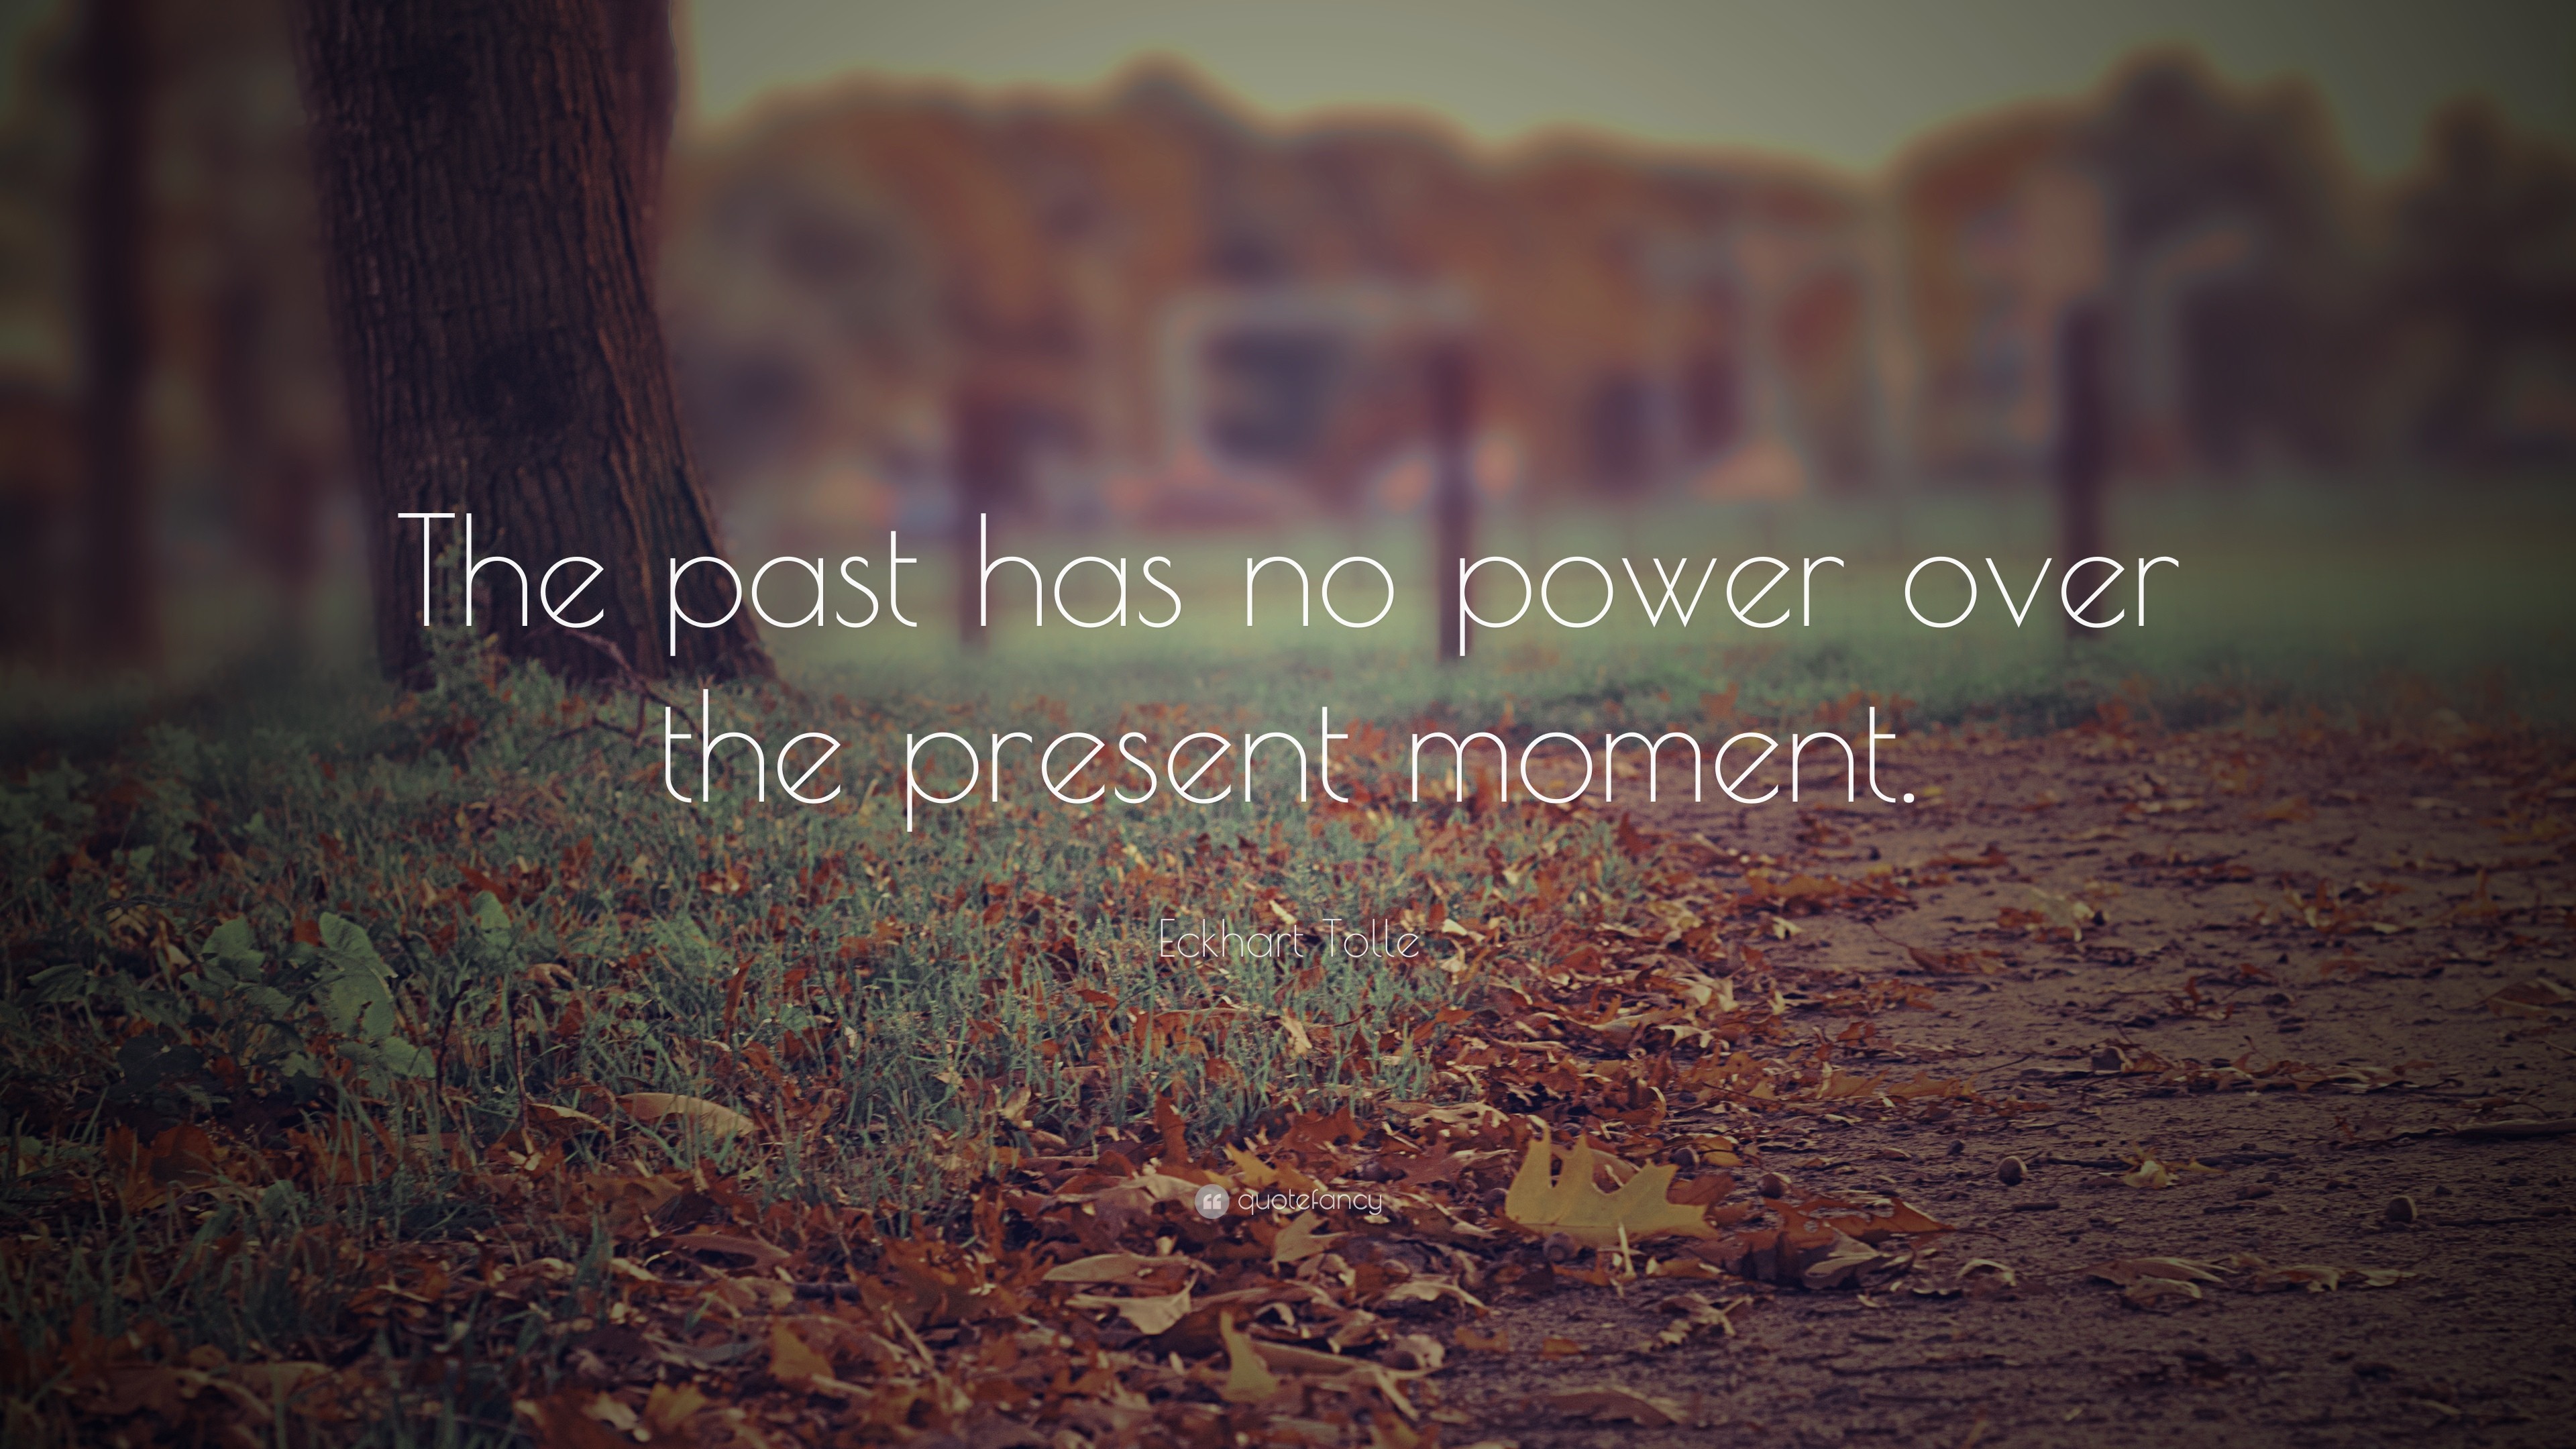 3840x2160 Positive Quotes: “The past has no power over the present moment.” —